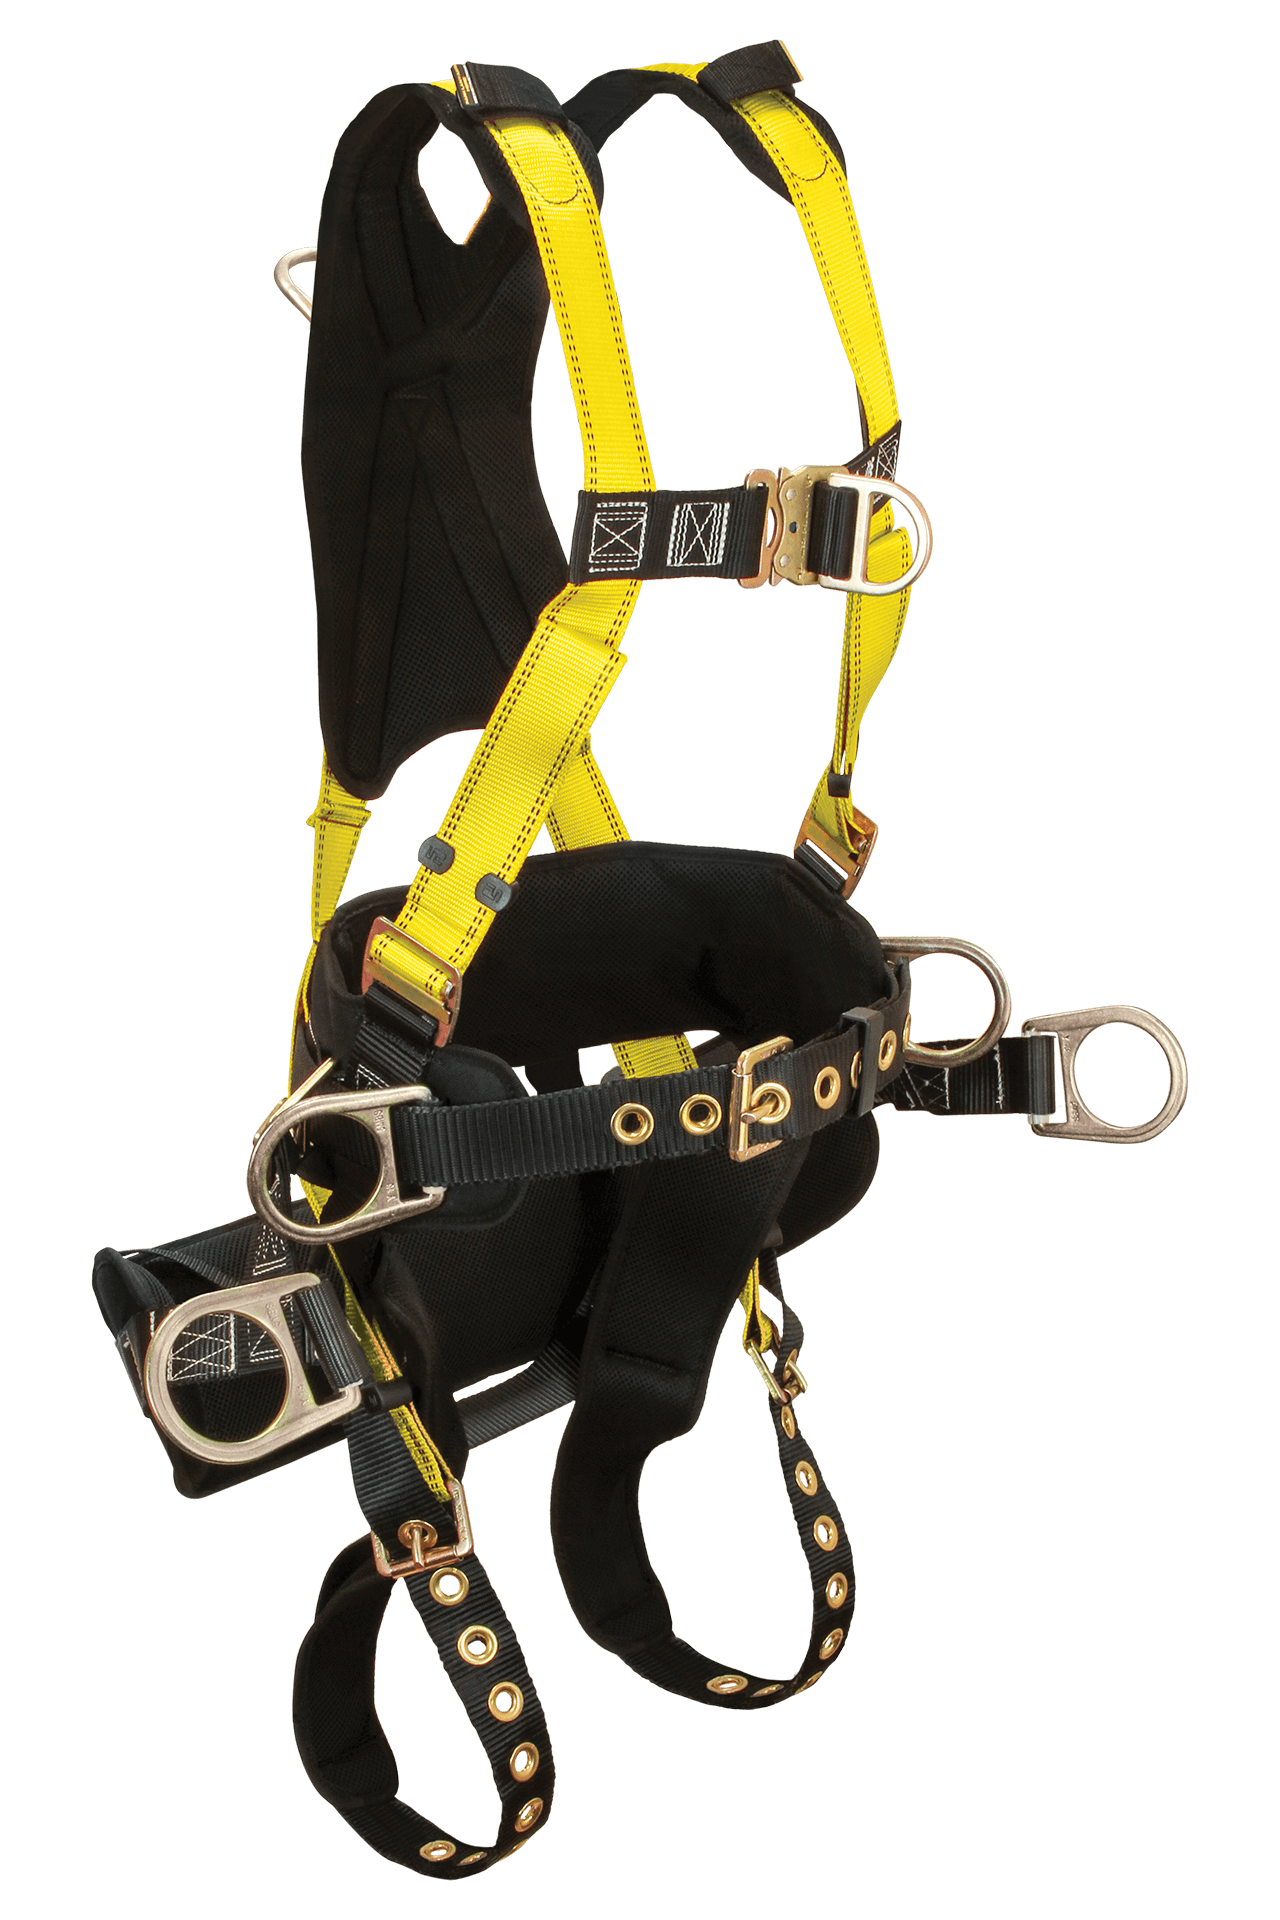 Falltech 7048 Journeyman 6D Tower Climber full body harness with removable suspension and positioning seat